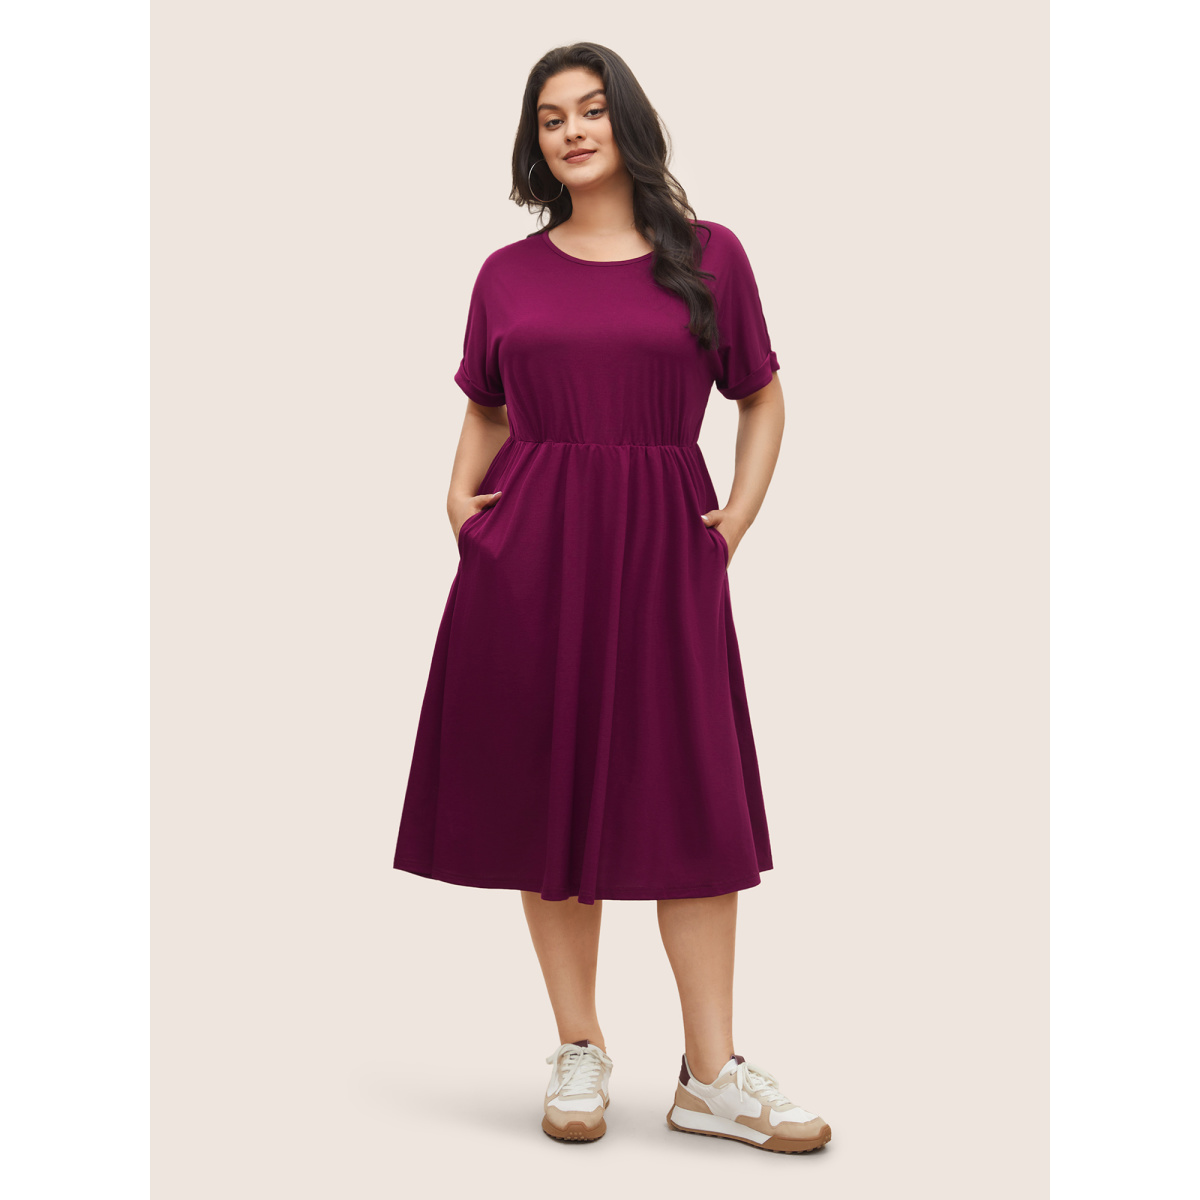 

Plus Size Supersoft Essentials Solid Pocket Cuffed Sleeve Dress RedViolet Women Non Round Neck Short sleeve Curvy Midi Dress BloomChic